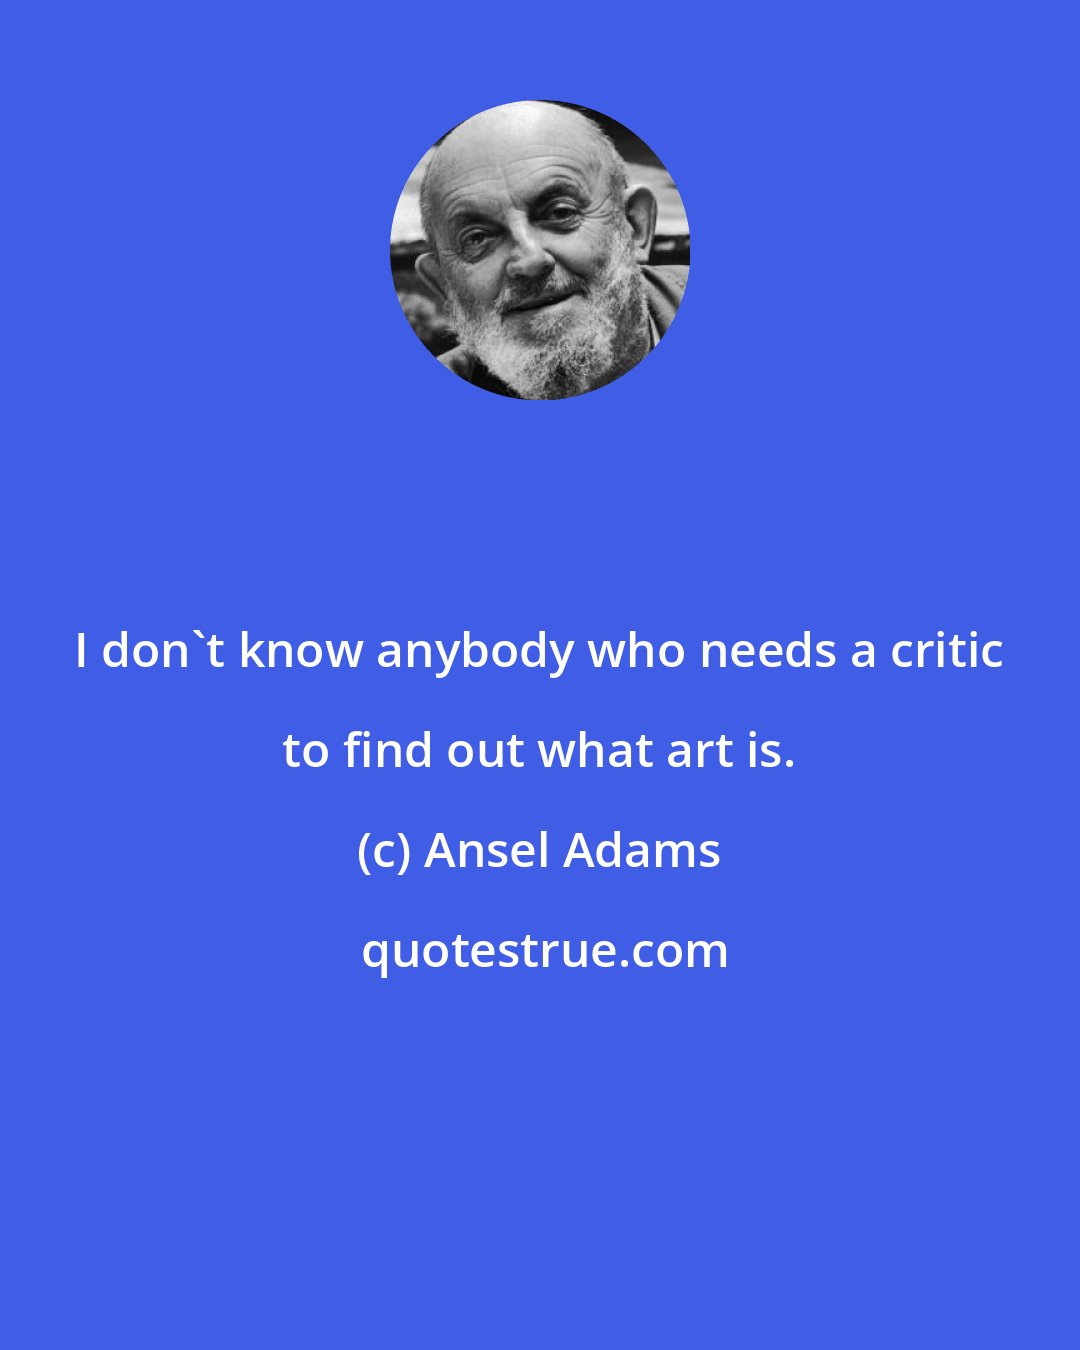 Ansel Adams: I don't know anybody who needs a critic to find out what art is.